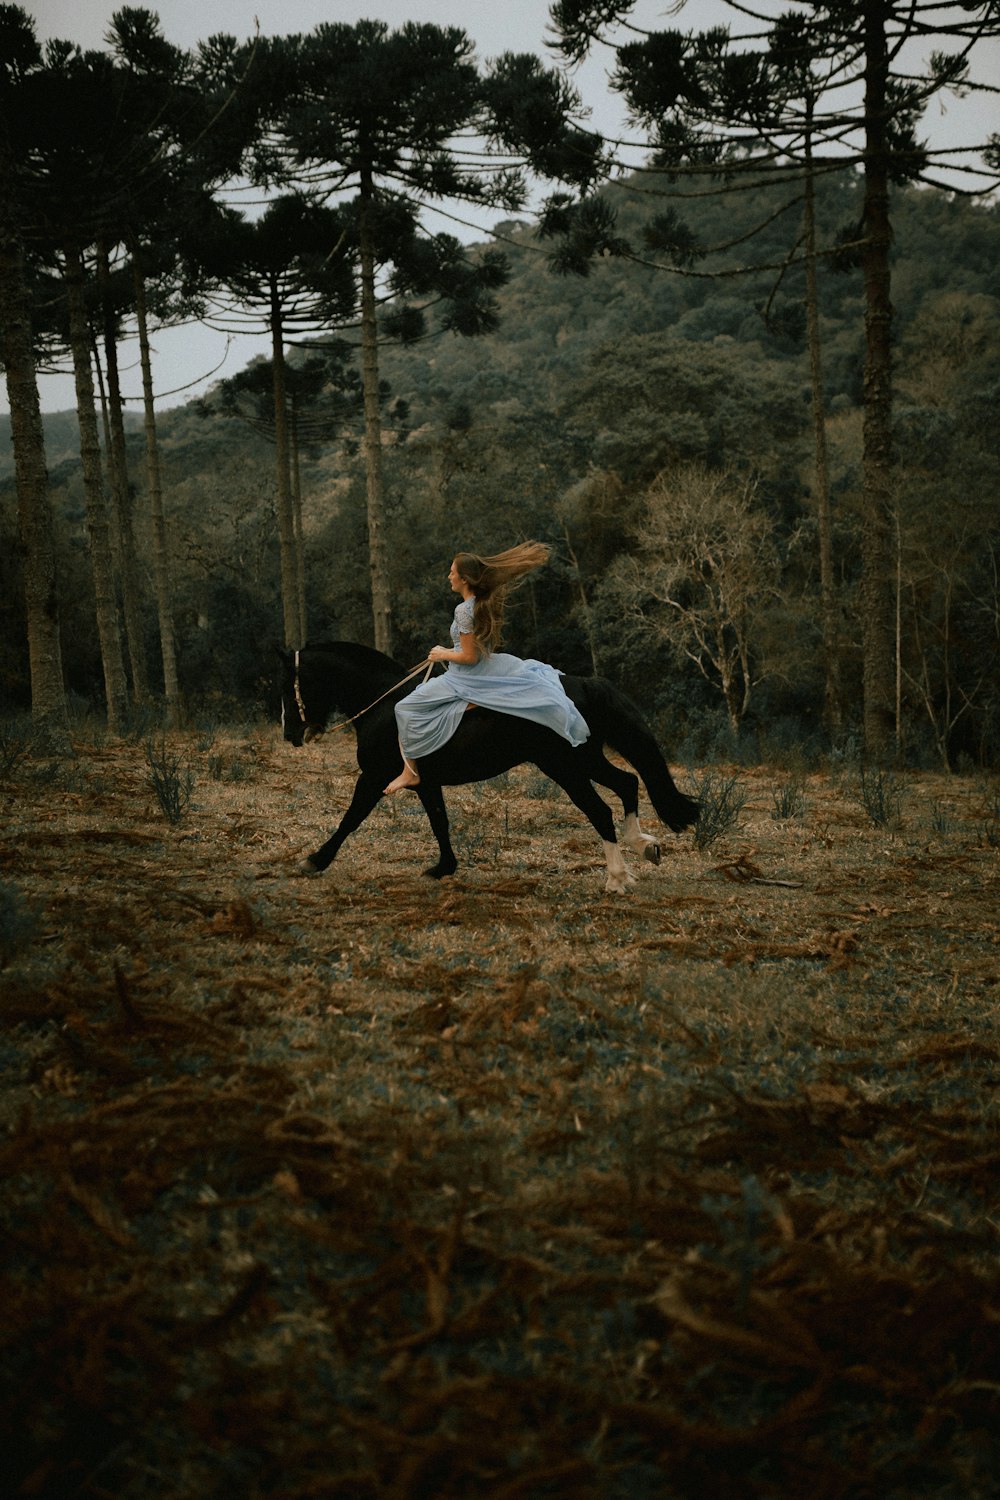 a woman riding on the back of a black horse